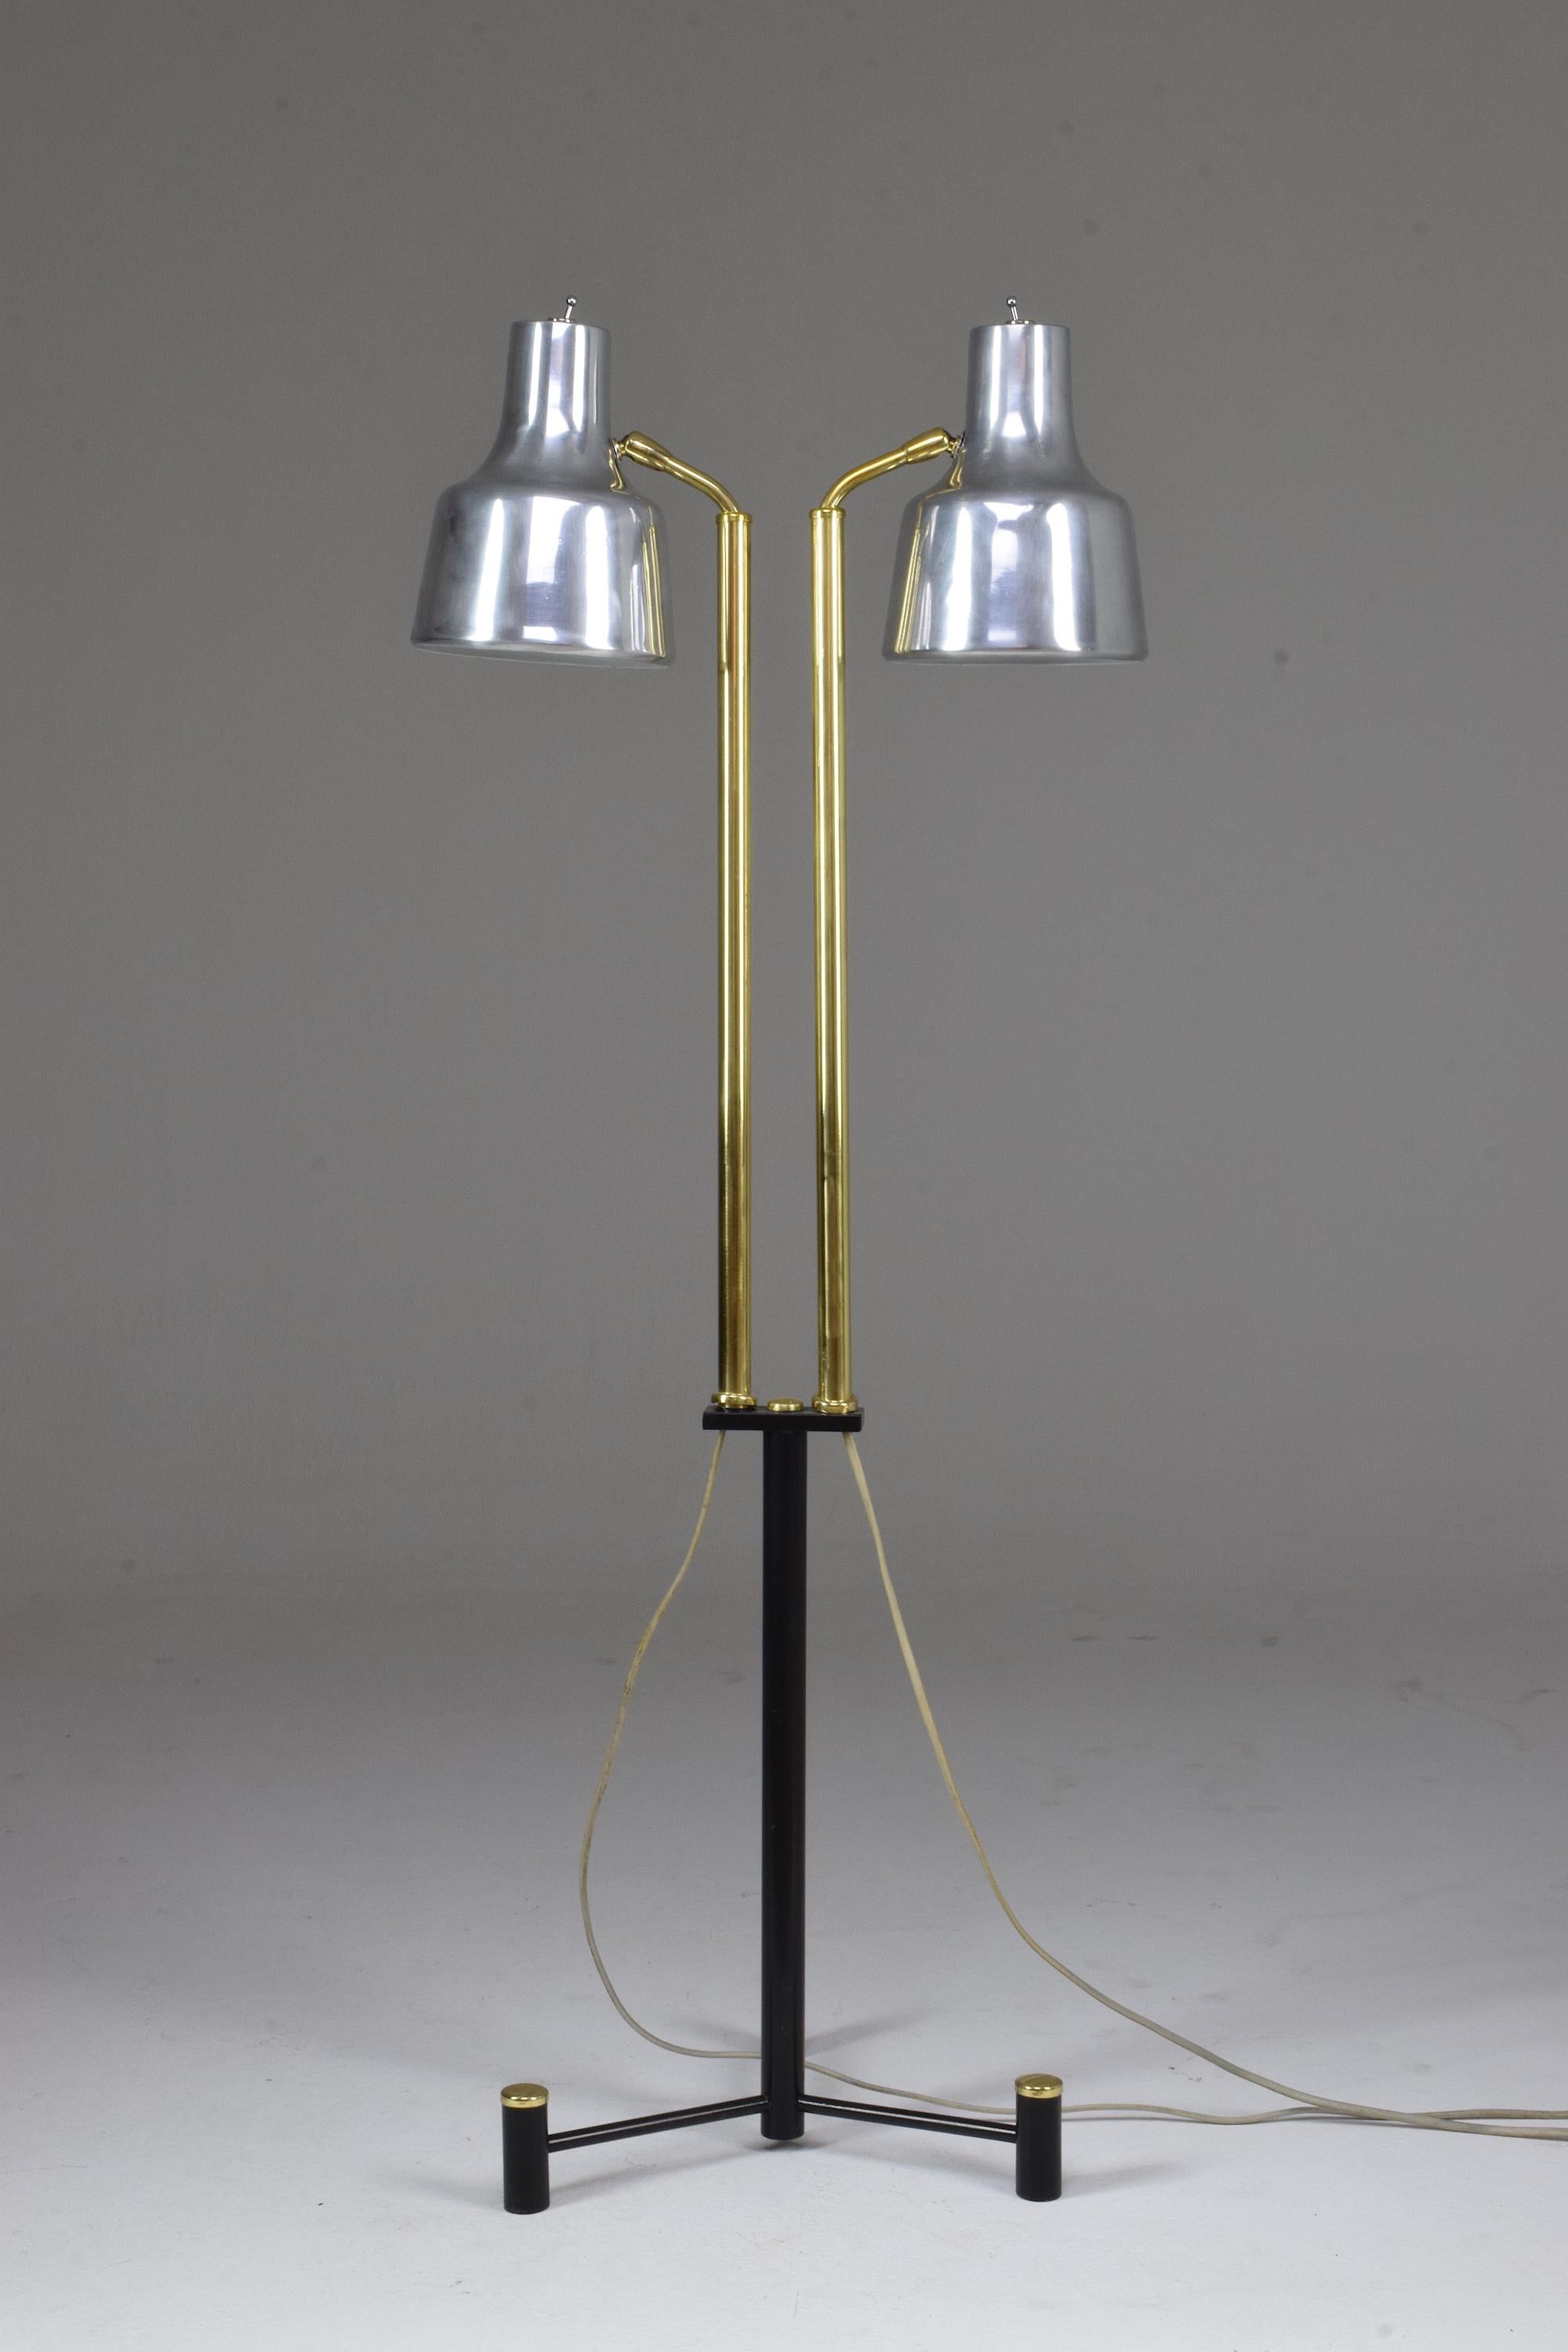 A midcentury vintage striking Scandinavian floor lamp by Fog & Morup designed with two standing steel floor lamps with adjustable brass arms and articulating aluminum shades. 
Denmark, circa 1960s. 

All our pieces are fully restored at our